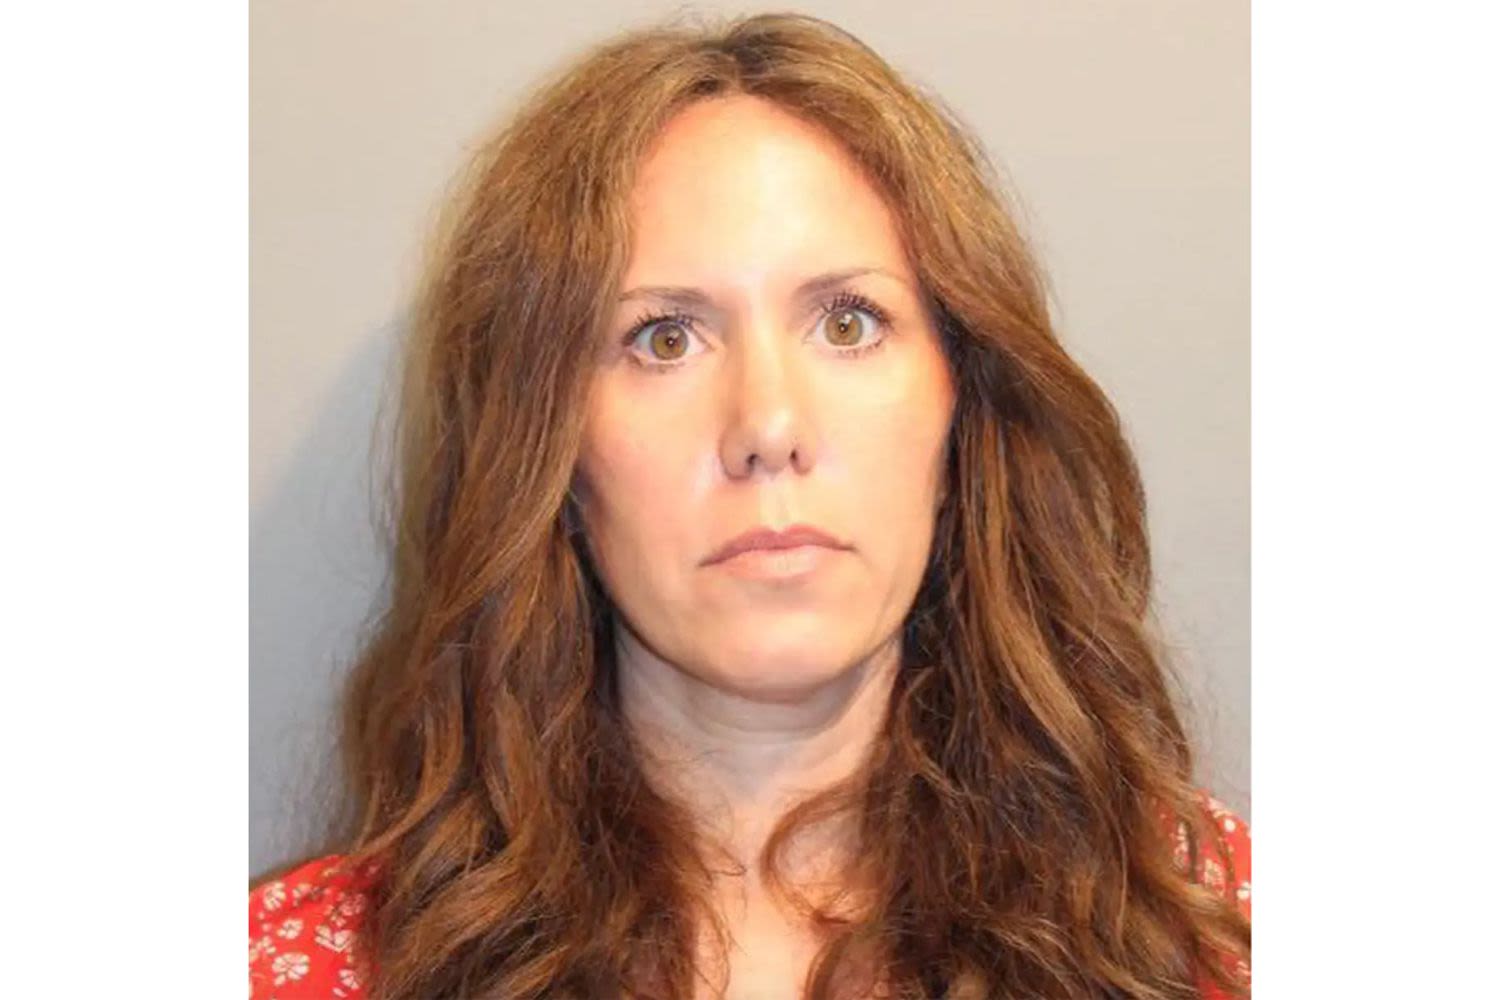 Married Guidance Counselor, 47, Arrested After Allegedly Giving 13-Year-Old Student 'Lap Dances': Police